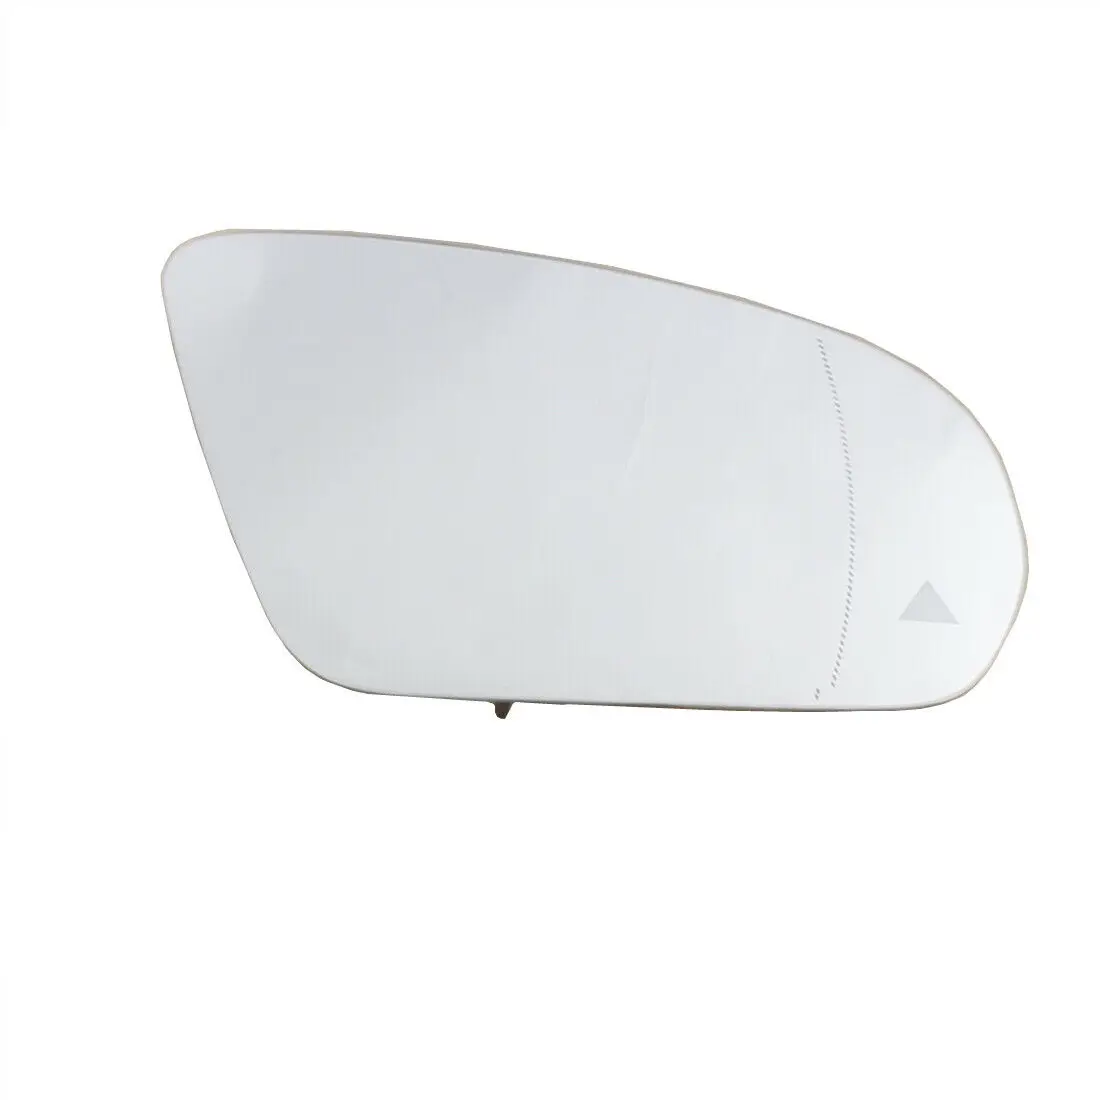 

Right Side Wing Rearview Mirror Glass Blind Spot Heated for Mercedes-Benz C,E,S,GLC Class W205 W222 W213 X253 2013-2021